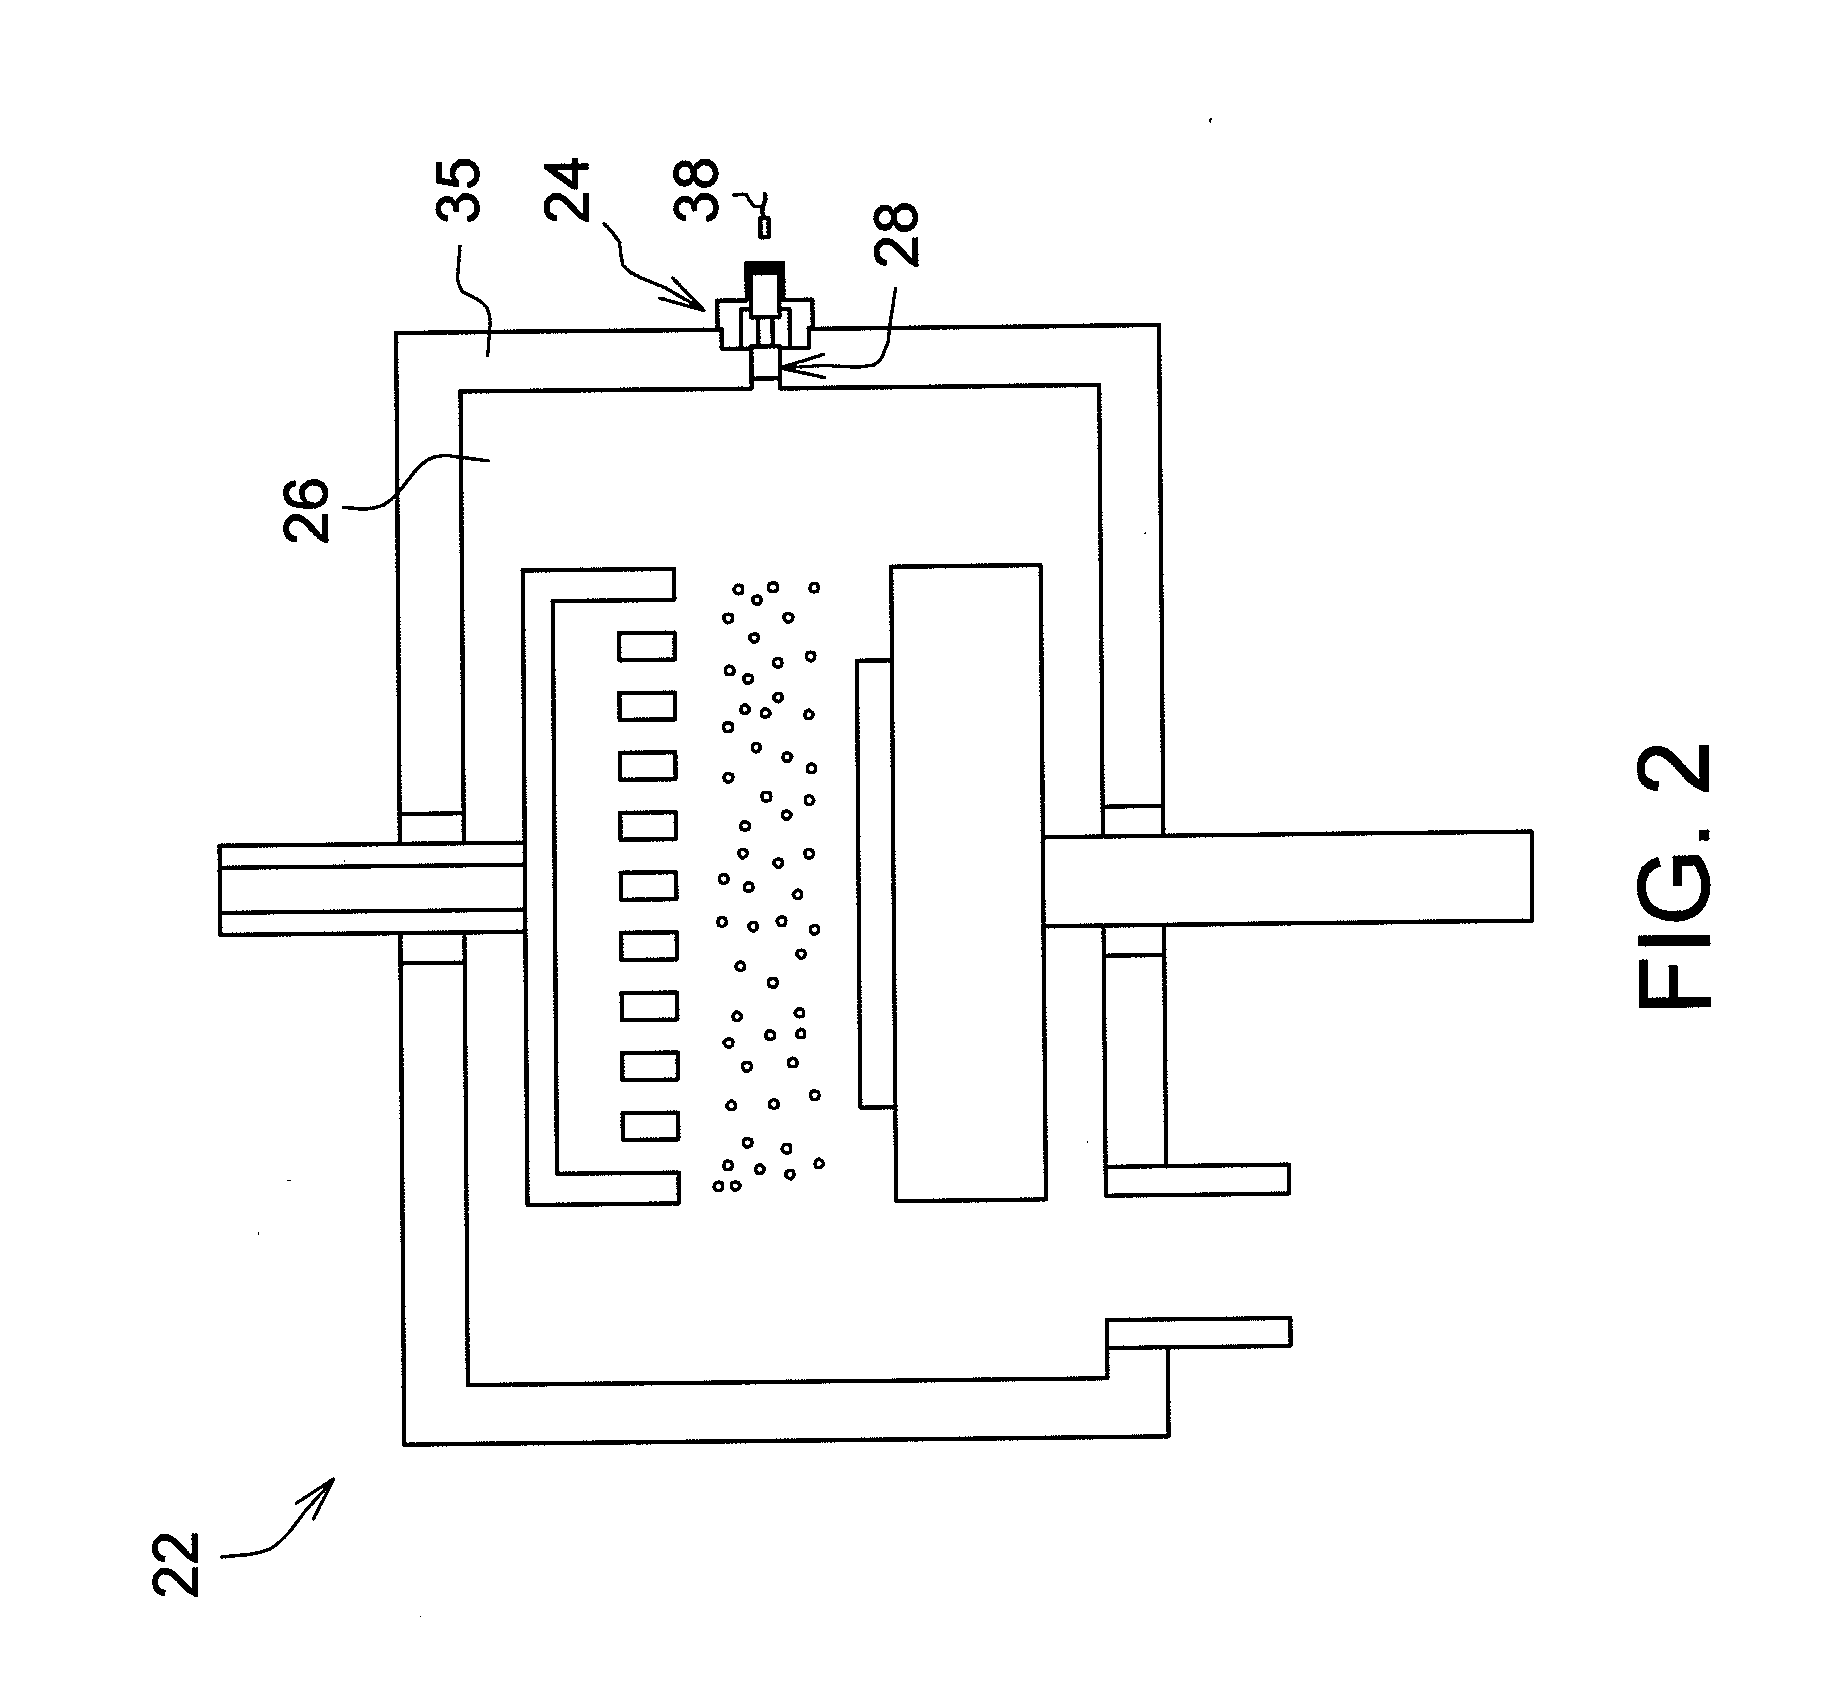 View port device for plasma process and process observation device of plasma apparatus